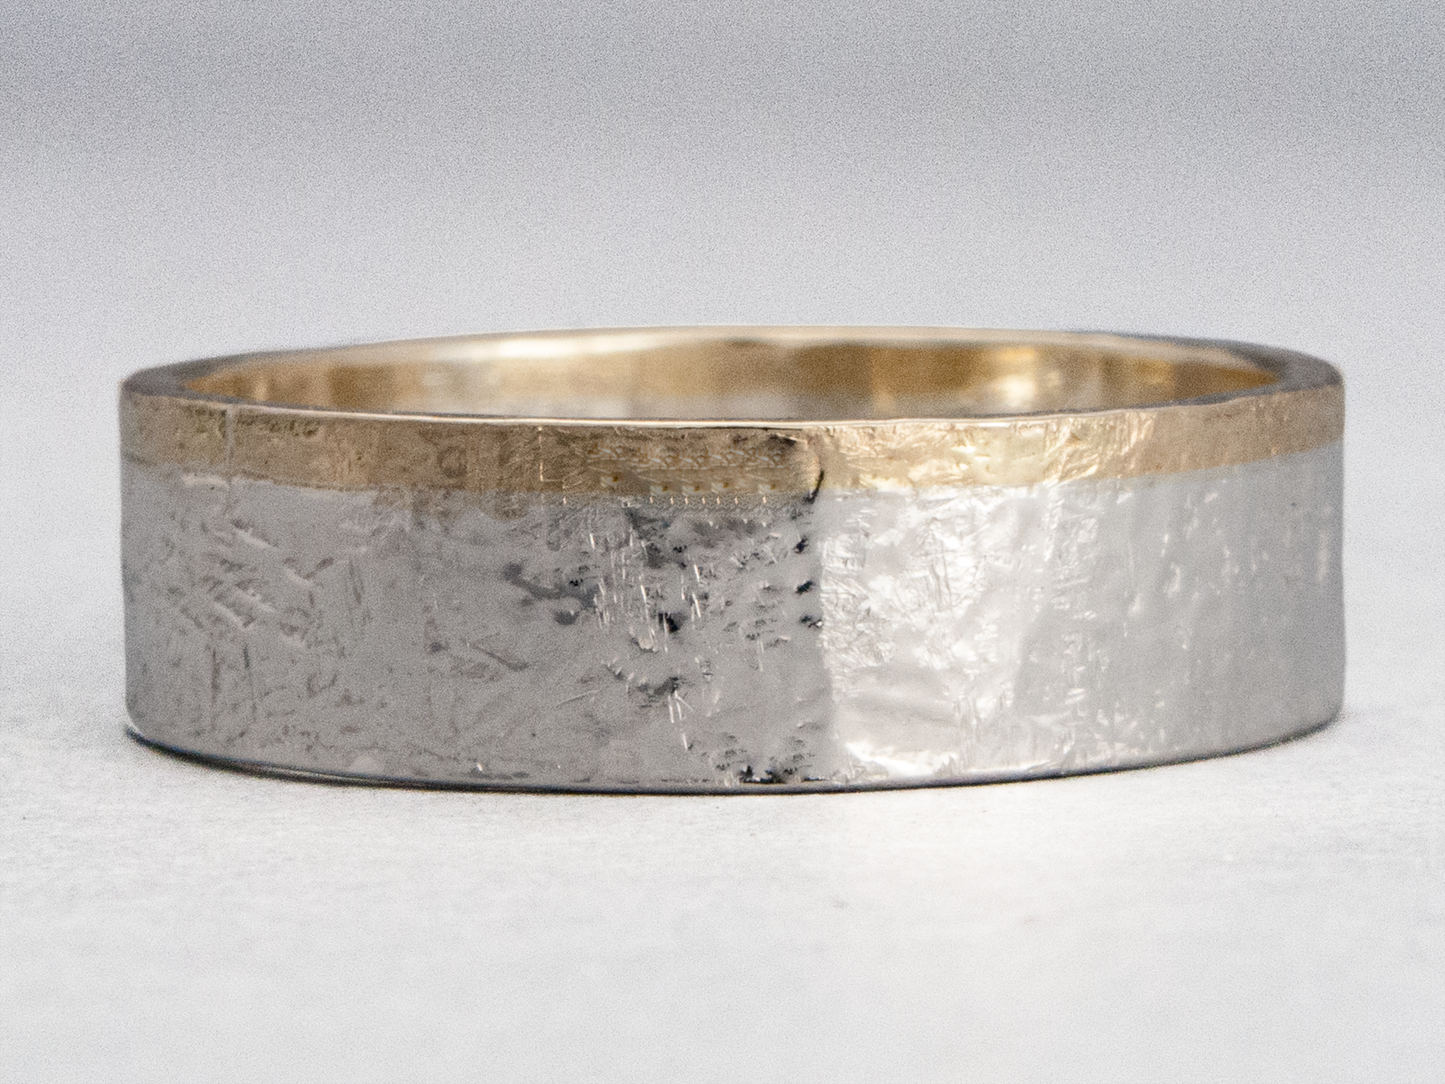 Part Of You Wide Flat Mixed Silver and Gold Wedding Band- Choice of 3mm-8mm widths, silver with a 1mm rail in white, rose or yellow gold